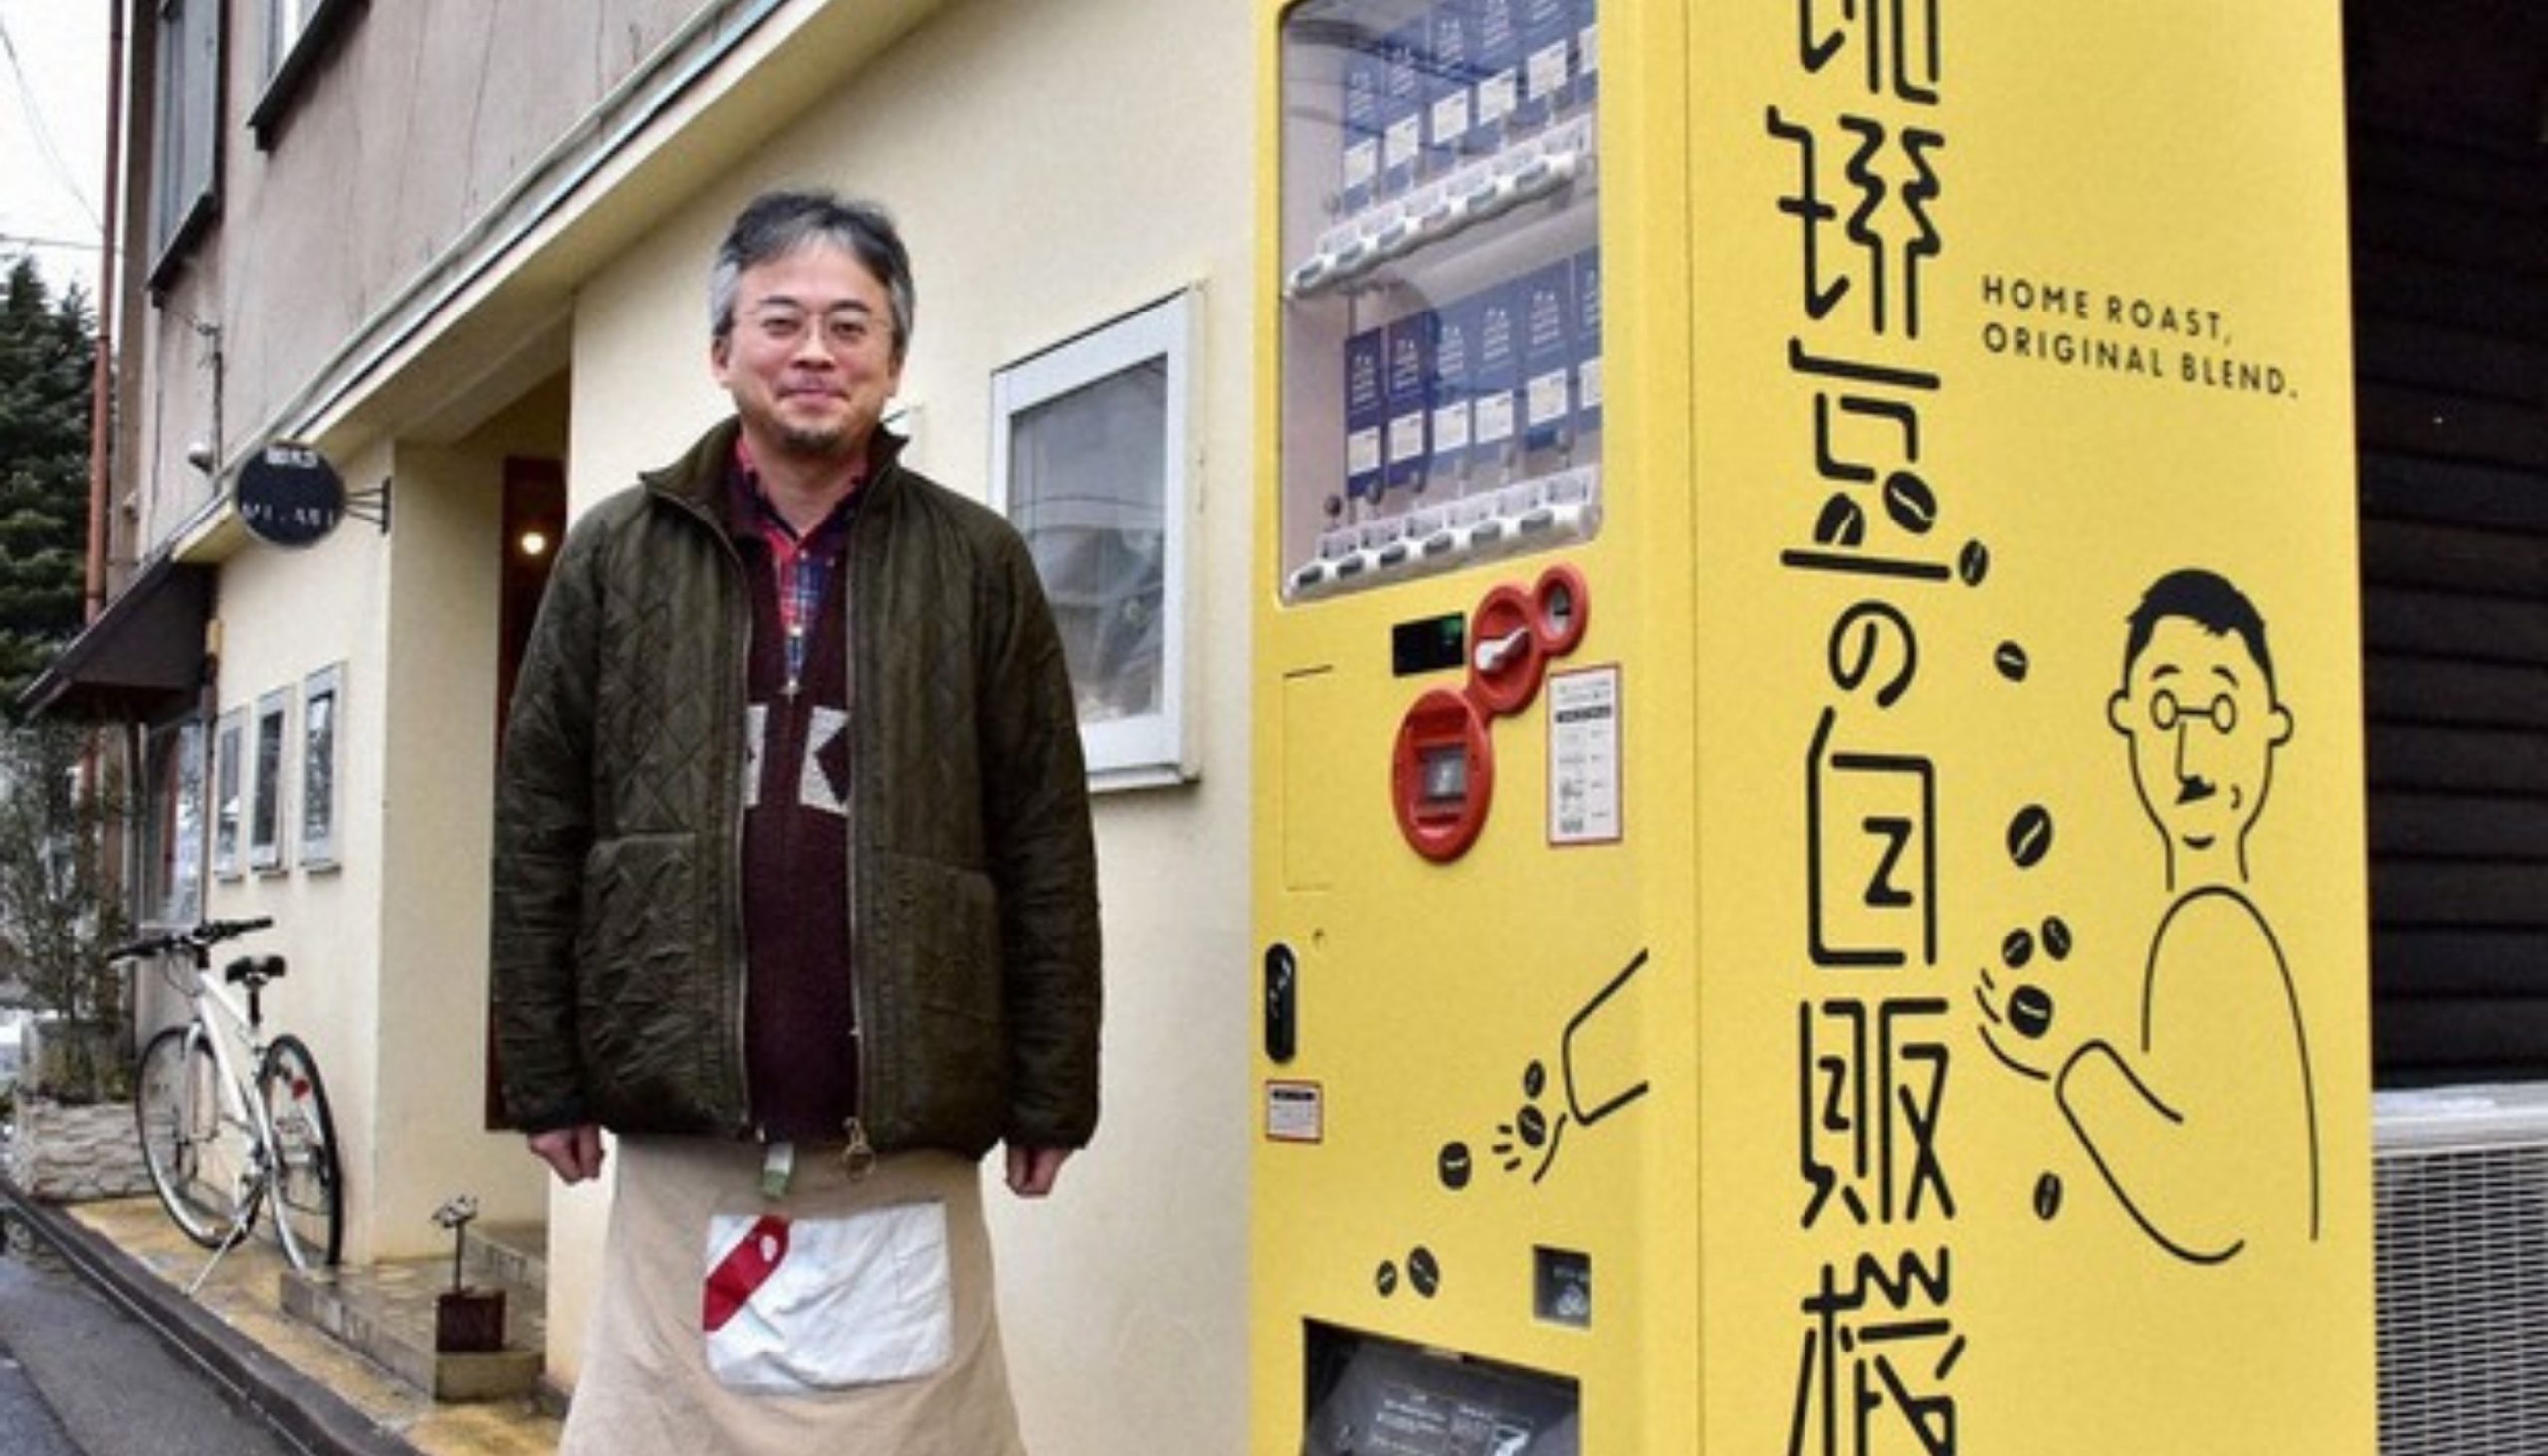 Uncle Masatoshi from Japan has started vending freshly roasted coffee beans, and it's going well